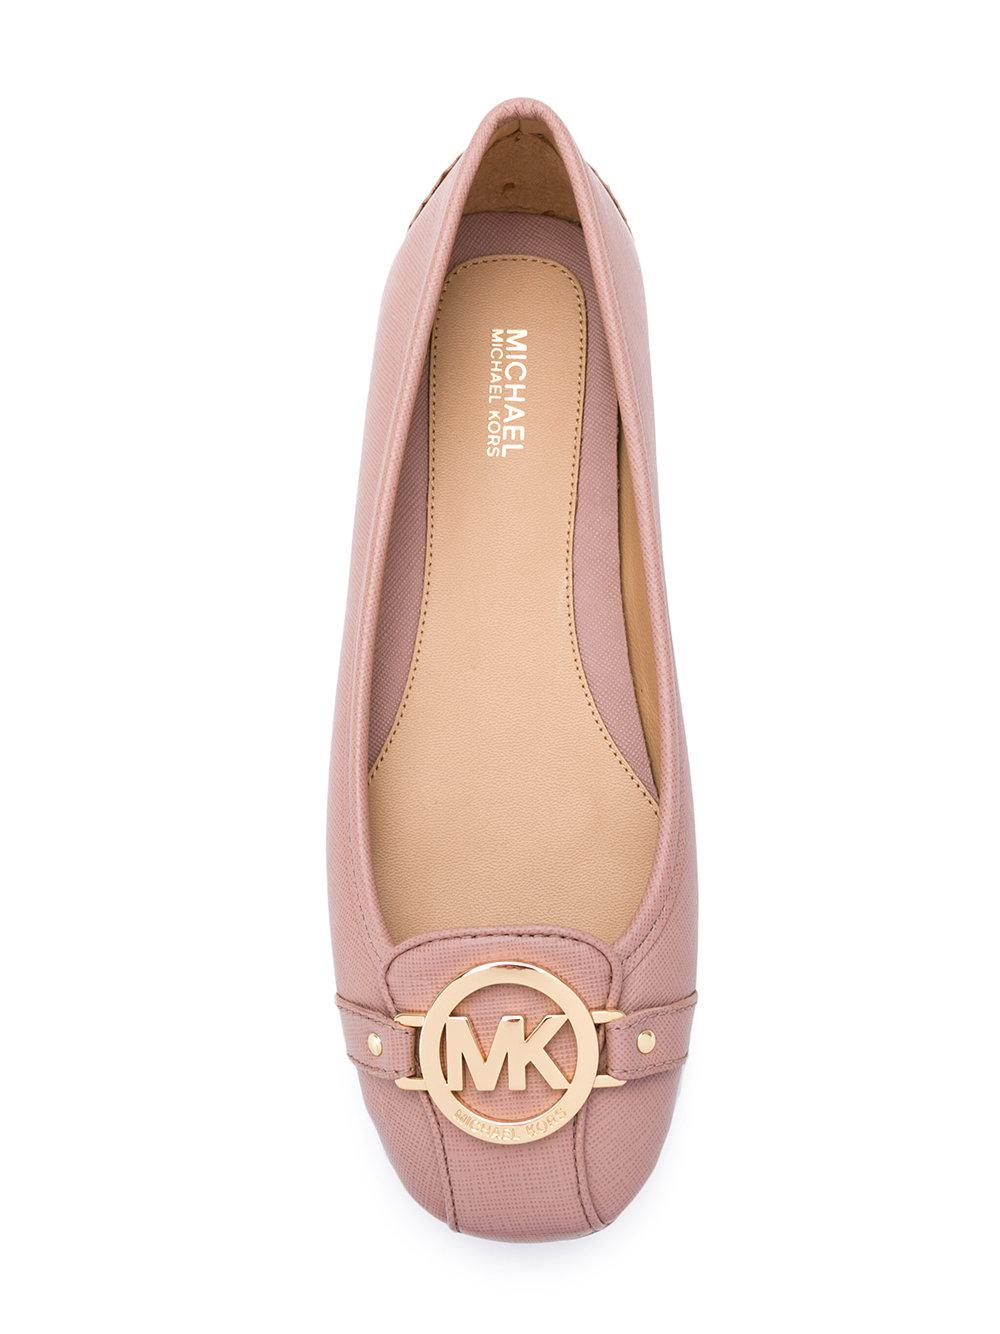 MICHAEL Michael Kors LILLIE MOC Beige  Fast delivery  Spartoo Europe    Shoes Ballerinas Women 16500 